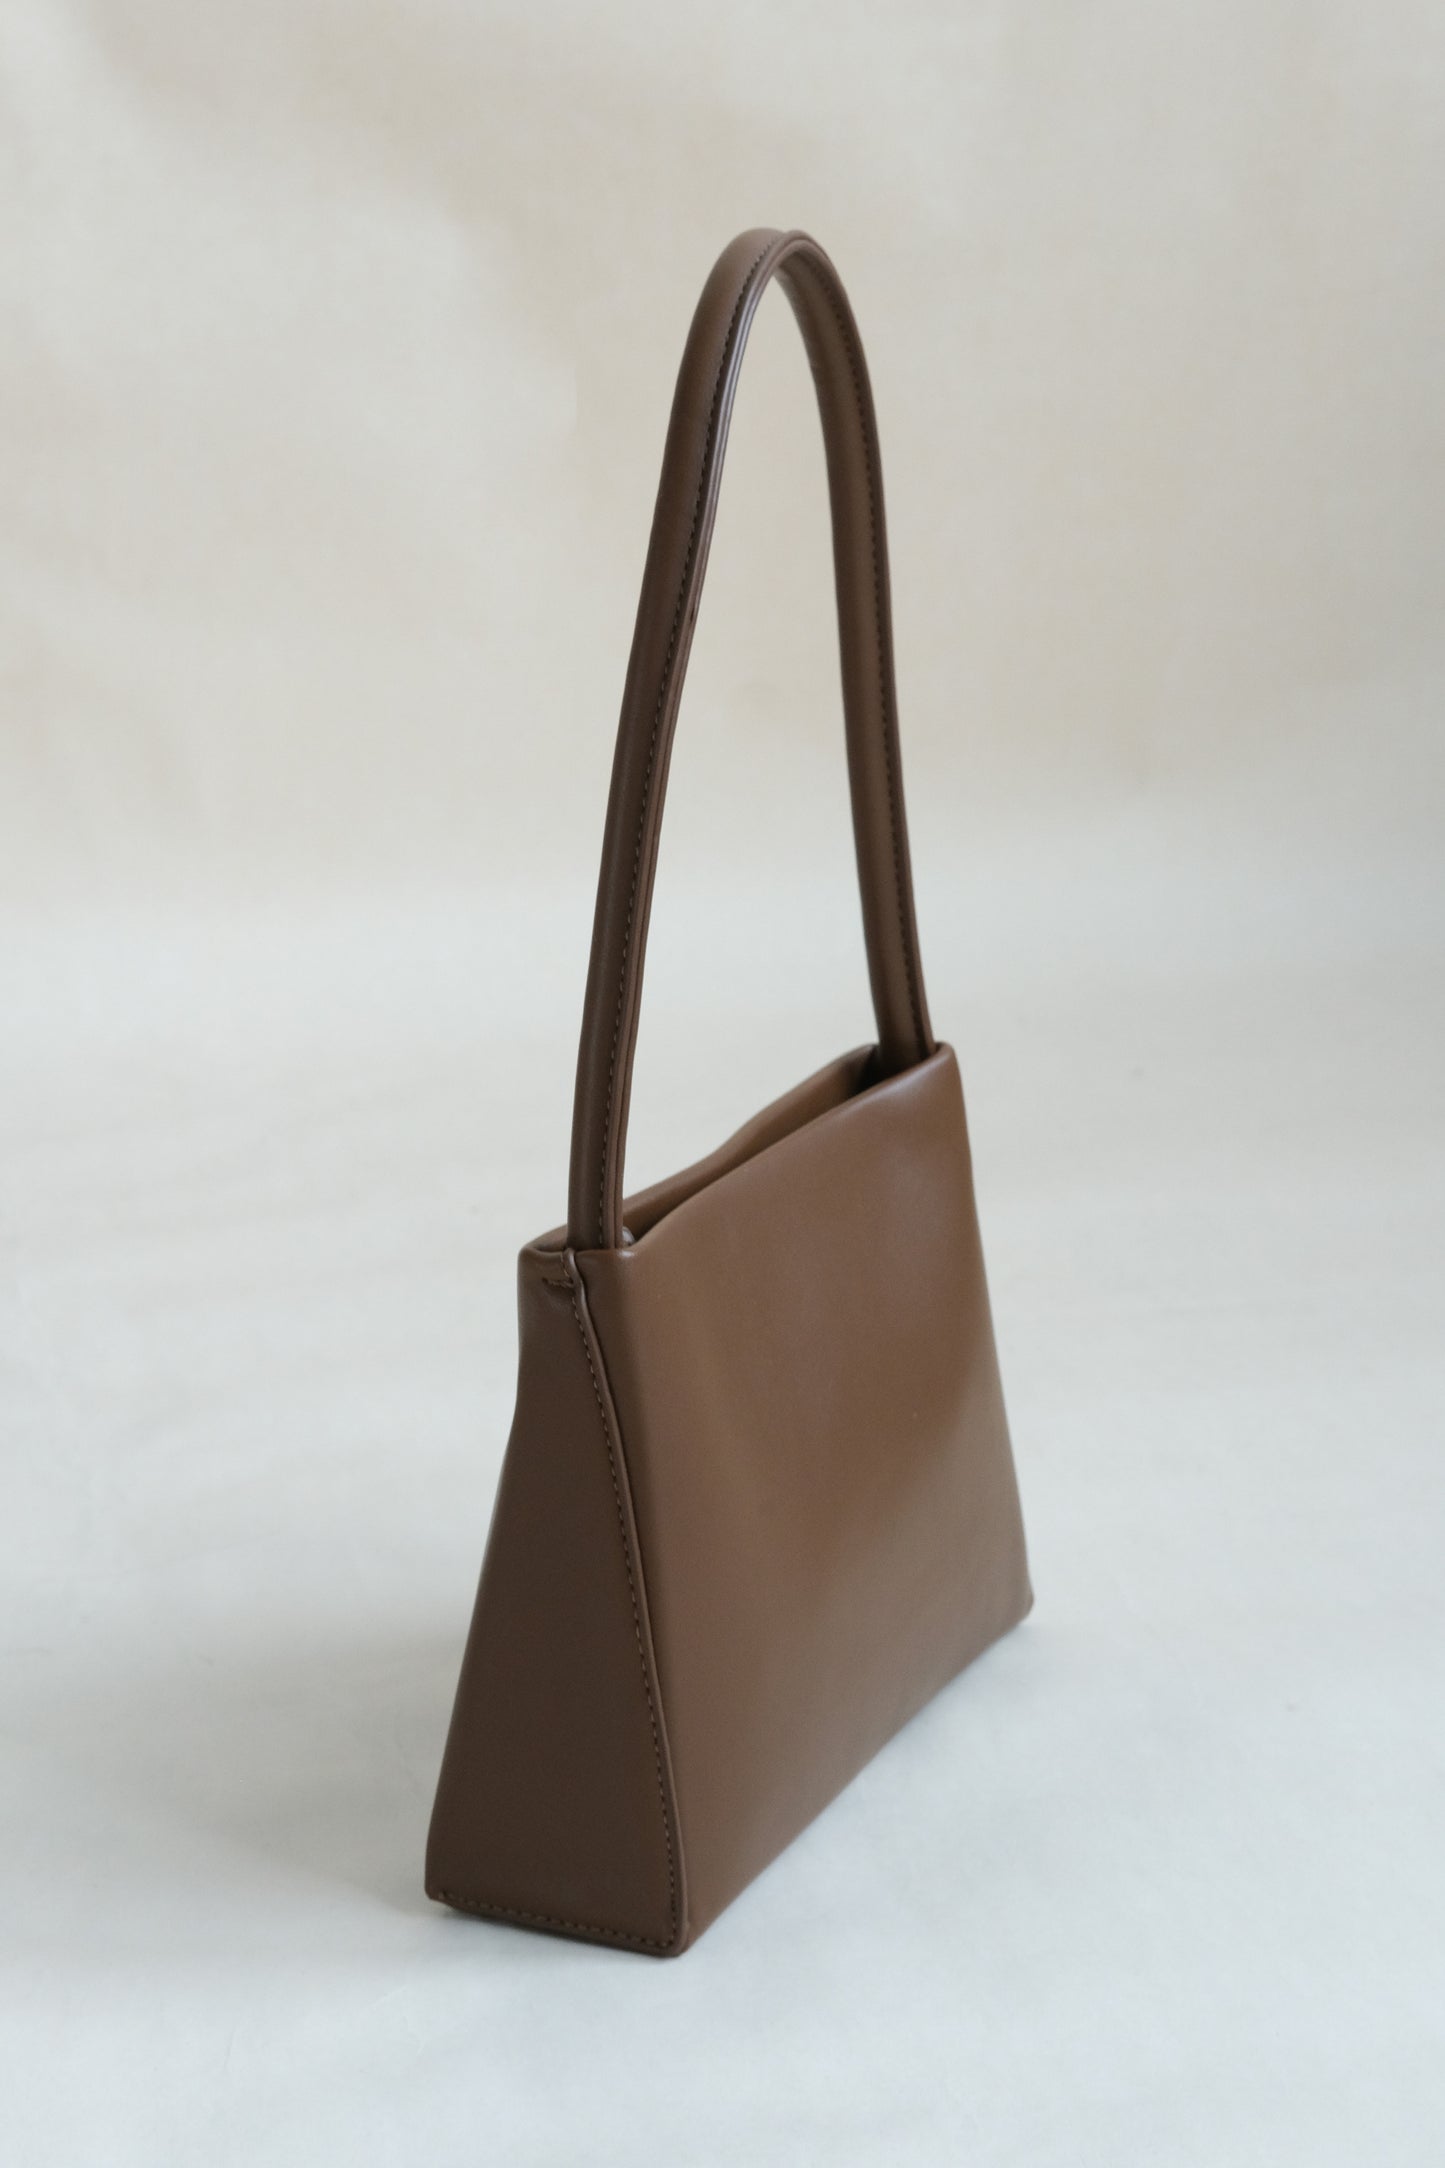 Square tote bag with one shoulder under the armpits in coffee